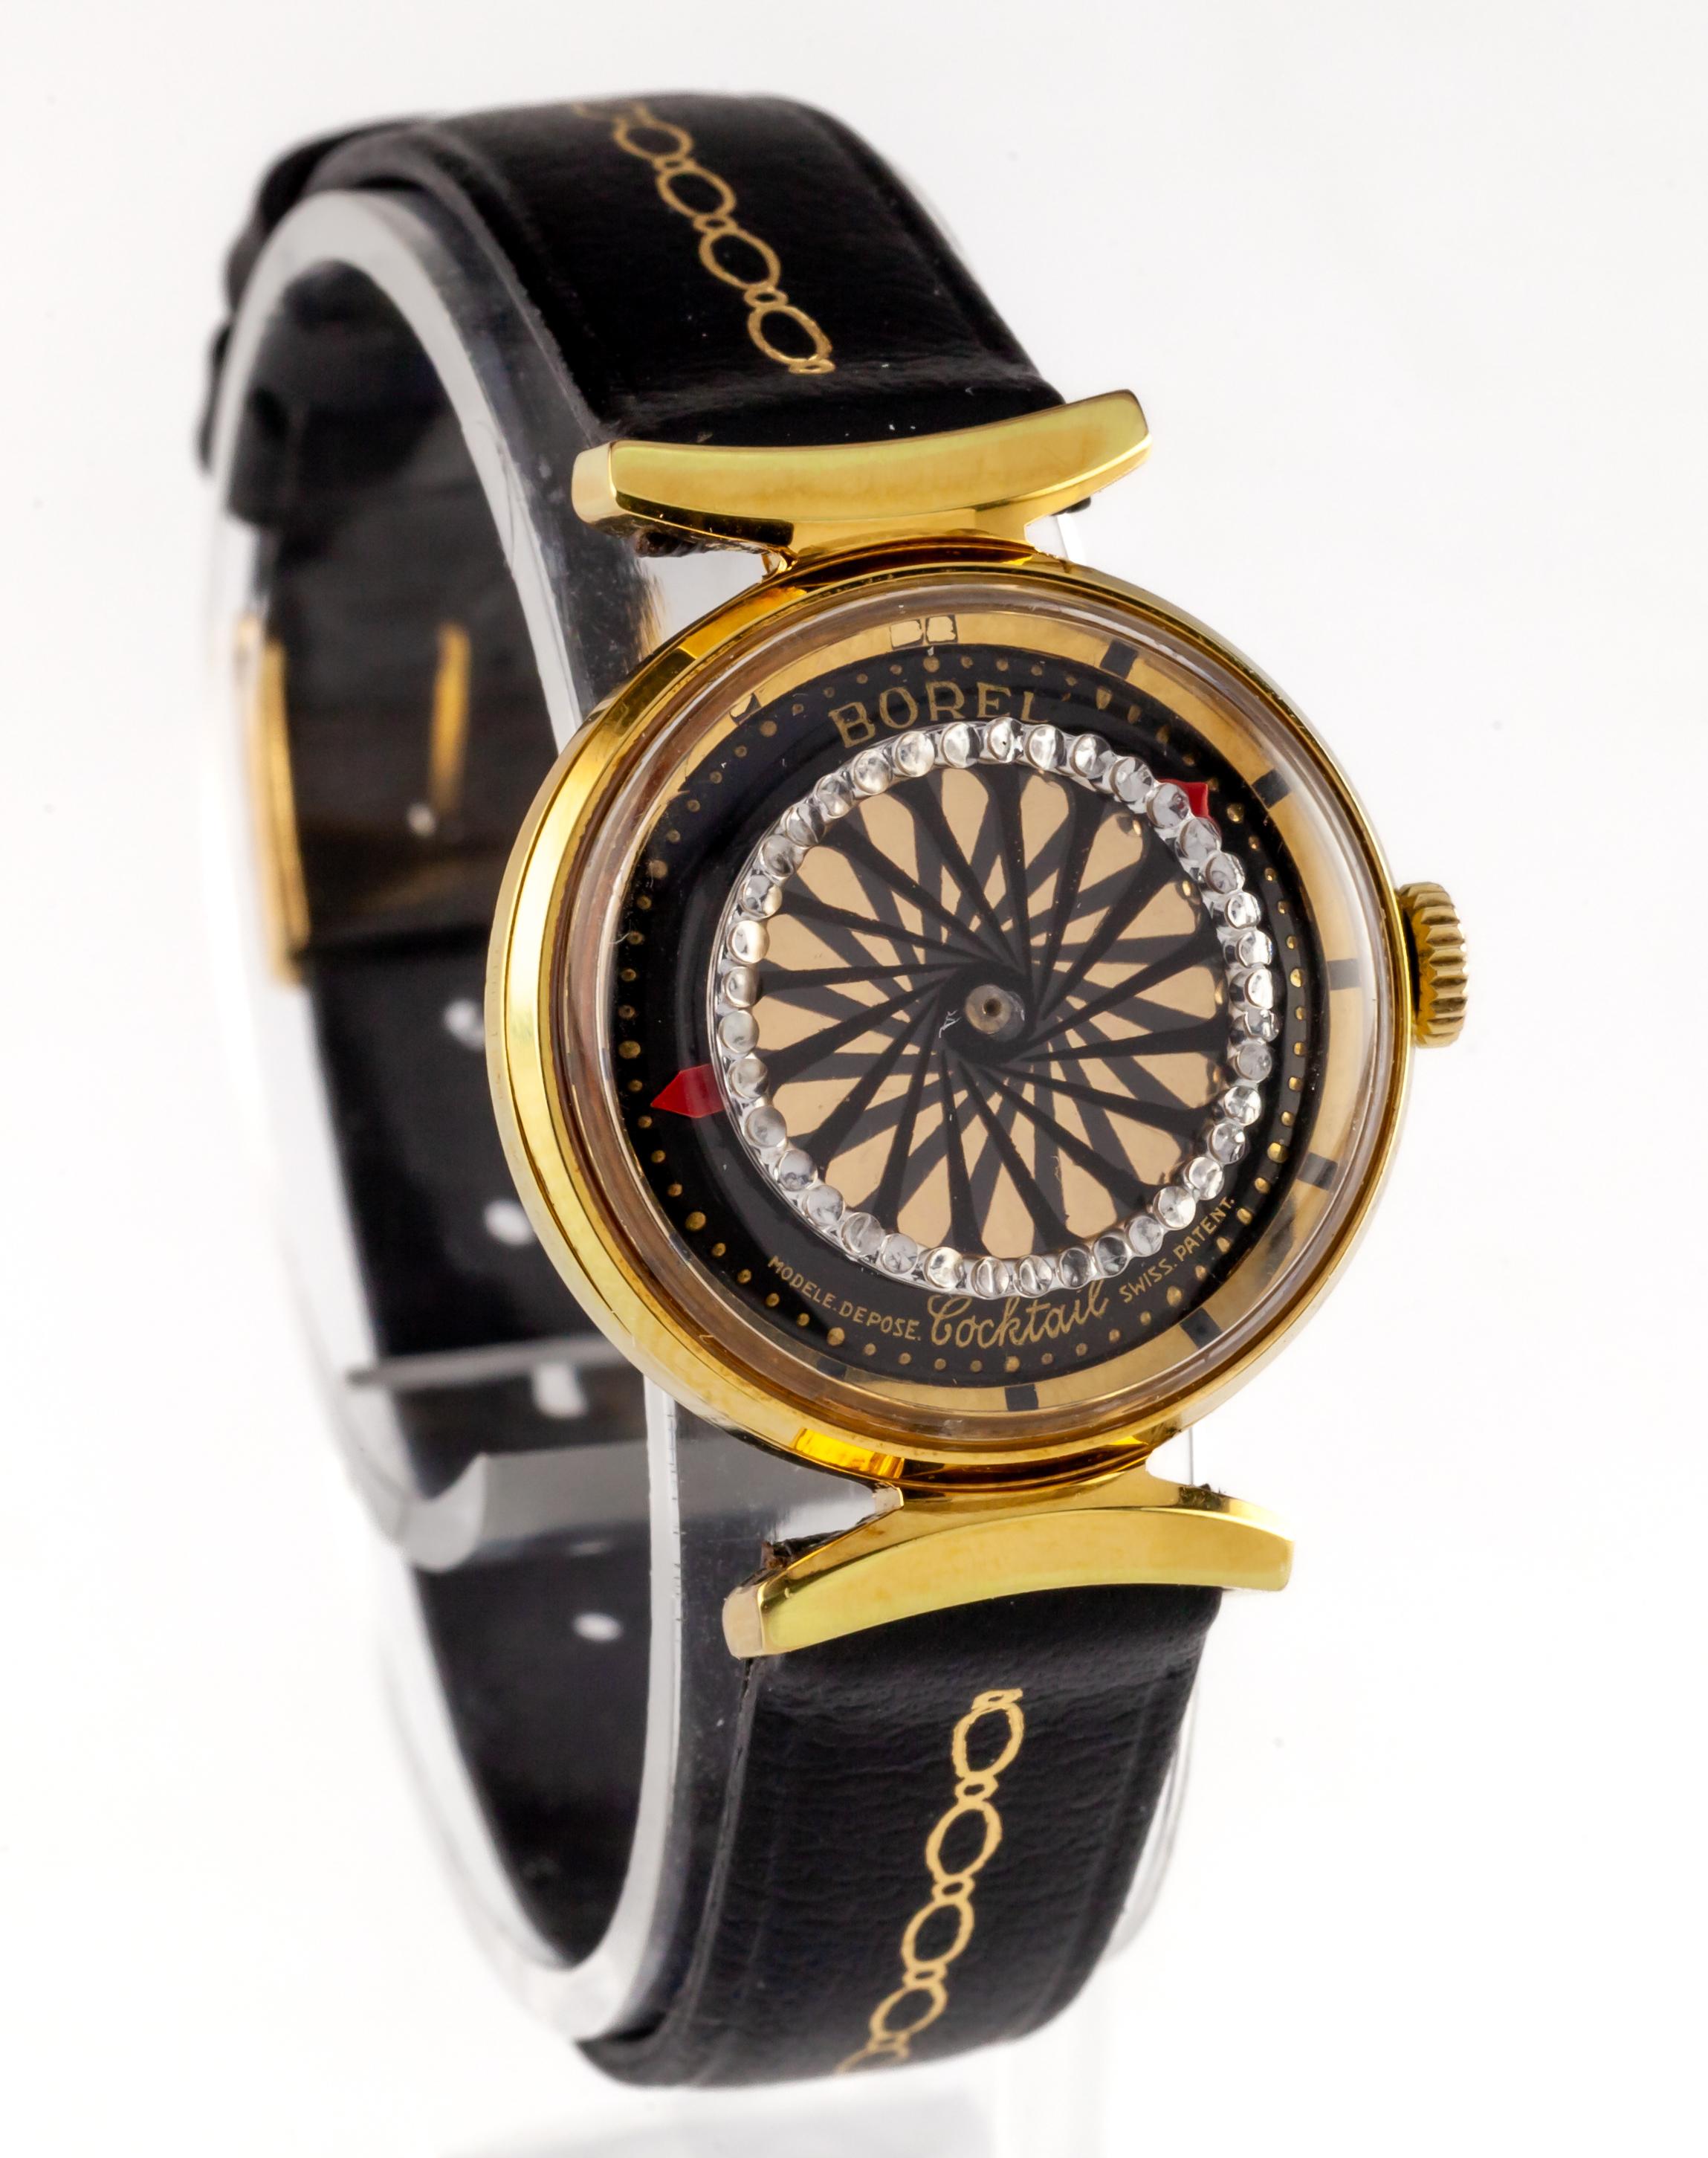 Borel Women's Gold-Plated Hand-Winding Kaleidoscope Watch w/ Crystals New Band
Movement #Borel 26
Model: Cocktail
Gold-Plated Round Watch Case w/ Exhibition Back
24 mm in Diameter (26 mm w/ Crown)
Lug-to-Lug Distance = 32 mm
Lug-to-Lug Width = 17